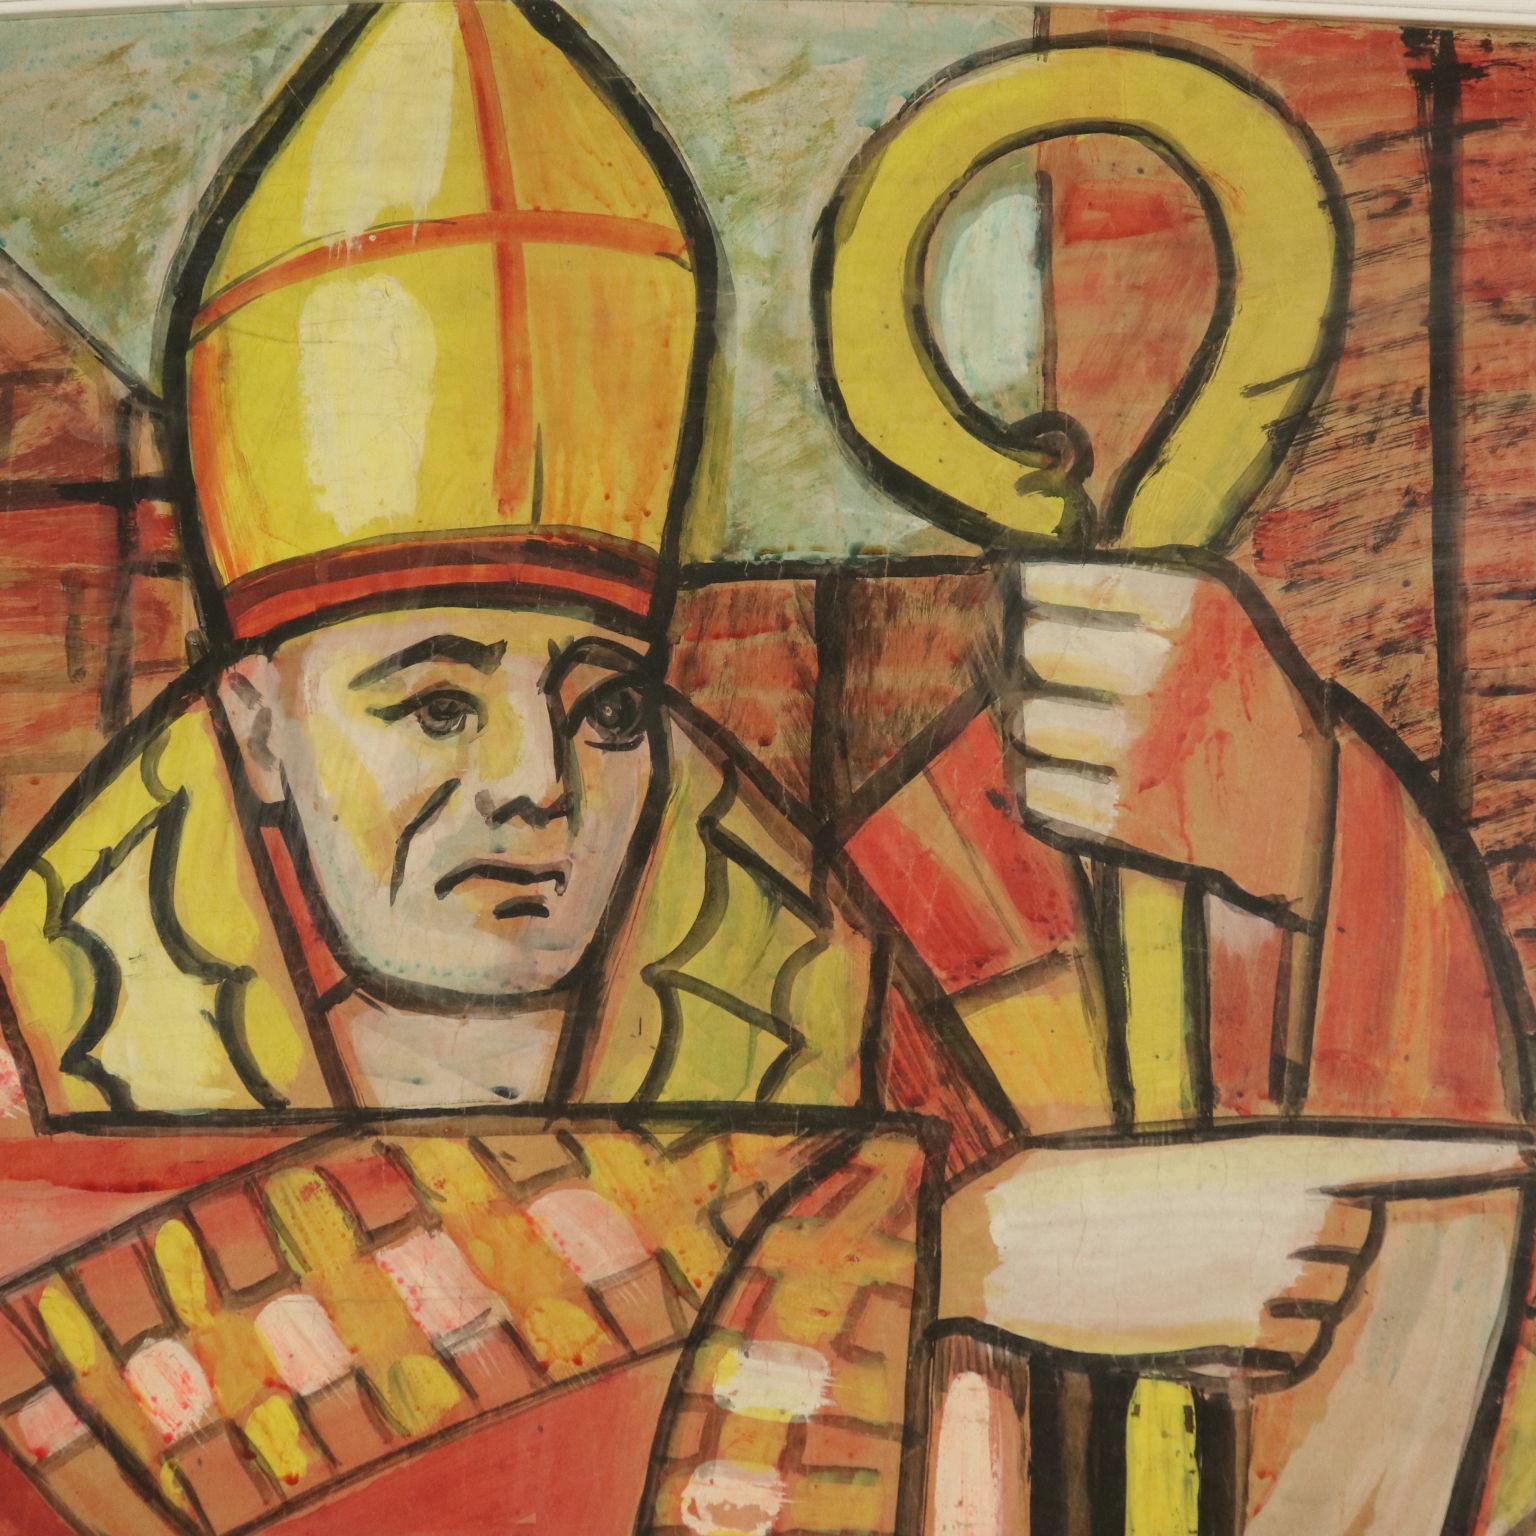 Original oil painting on cardboard for the preparation of the stained glass window of the church of Viggiù (Varese), for which the master Aligi Sassu made many works. This painting comes with expertise on picture signed by Alessandro Grassi, master